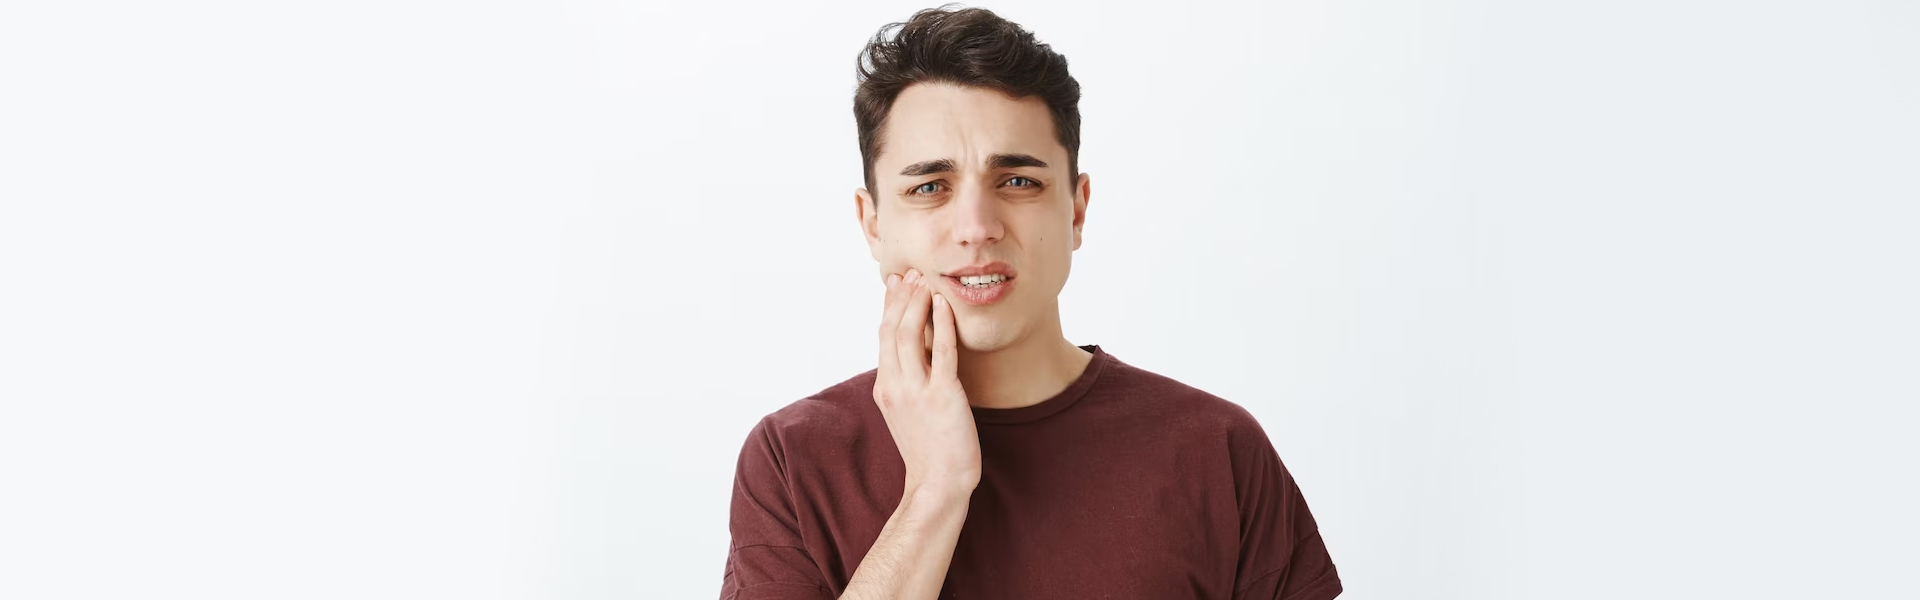 tooth extraction Near you at Advanced Dental of Westport CT